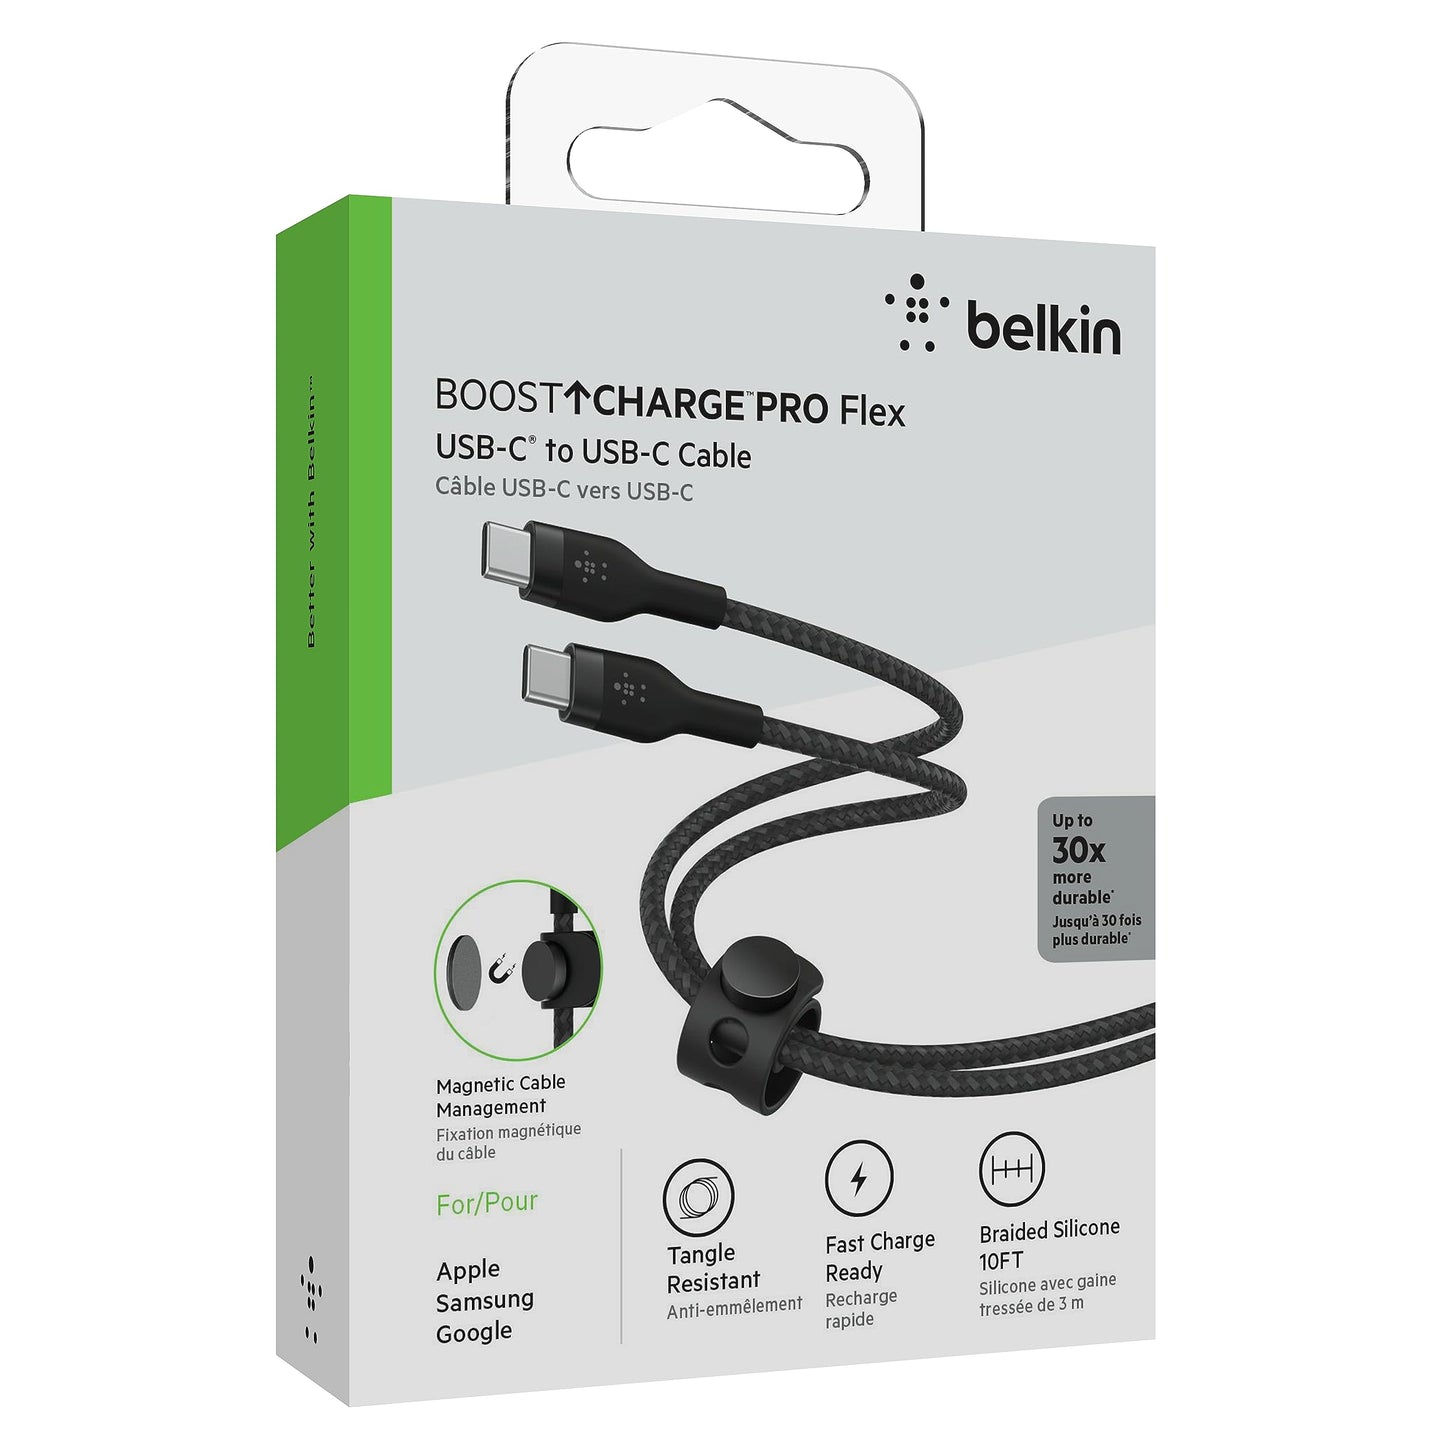 Belkin BoostCharge Pro Flex USB-C Cable with USB-C Connector 10\' Cable + Strap - Slate